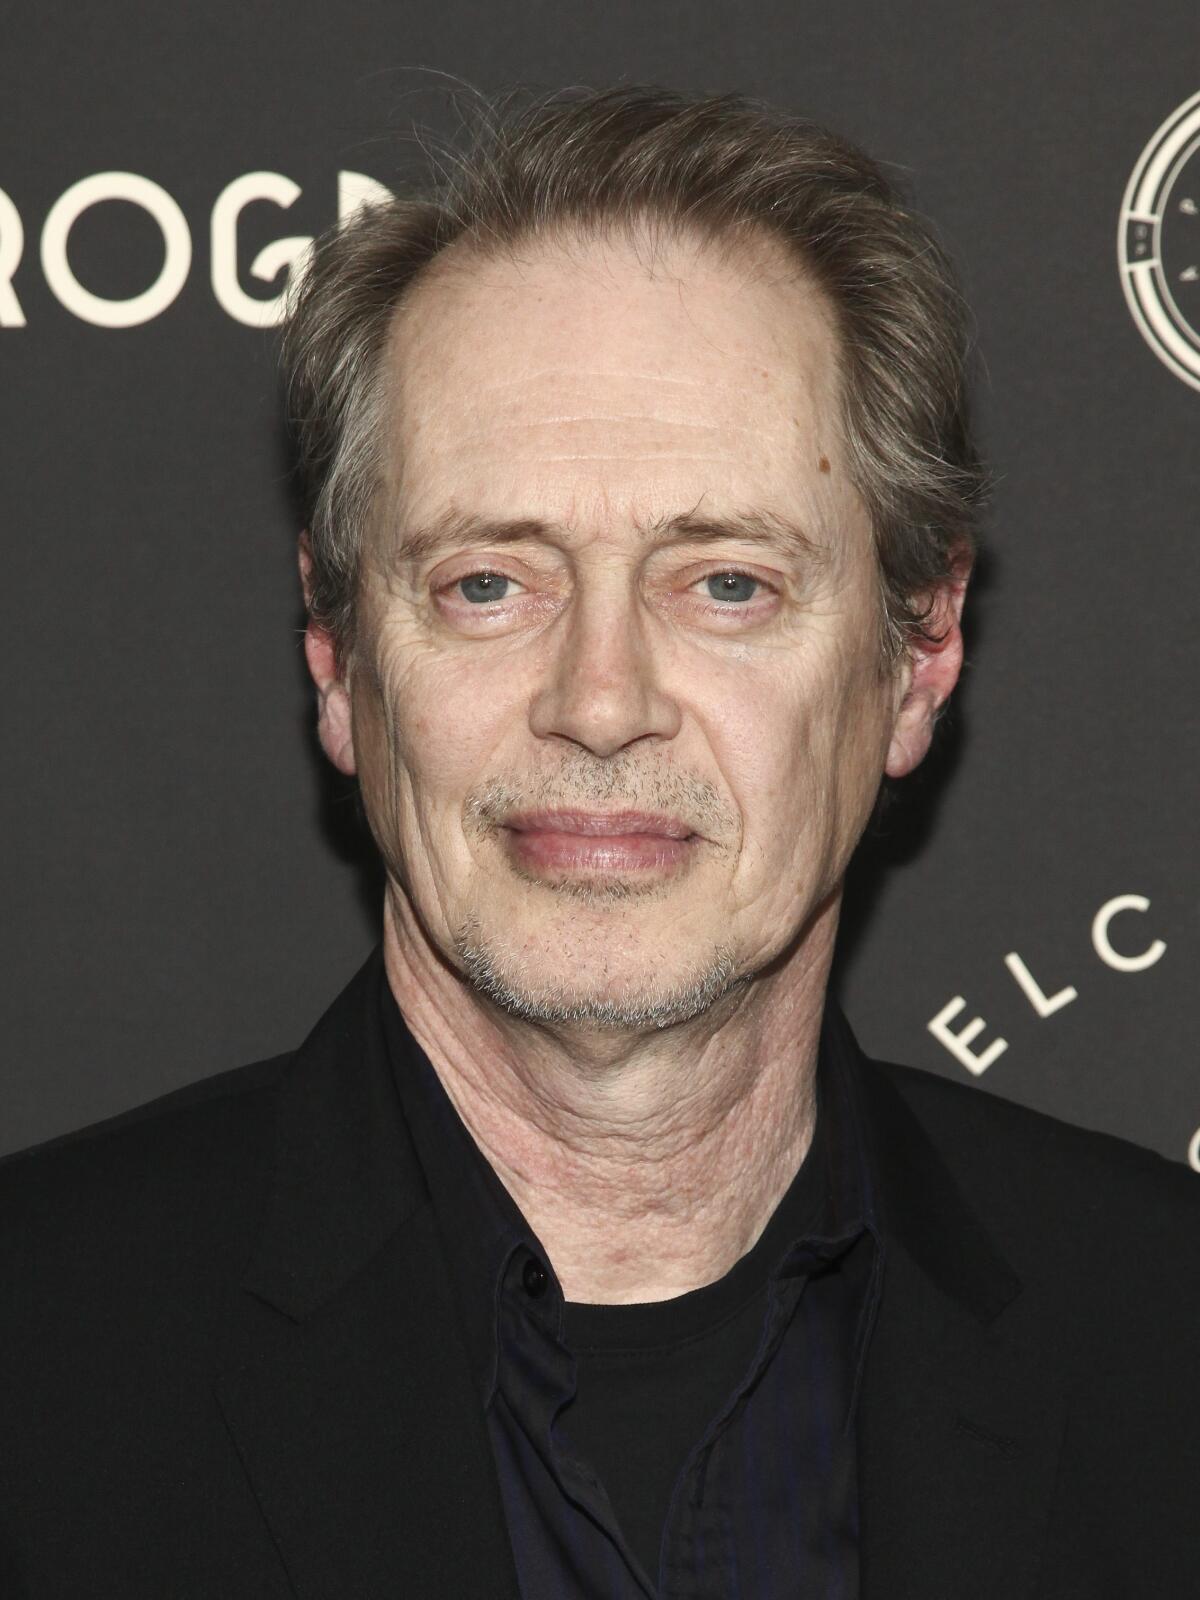 Steve Buscemi wears a black shirt and stands in front of a black backdrop with white writing